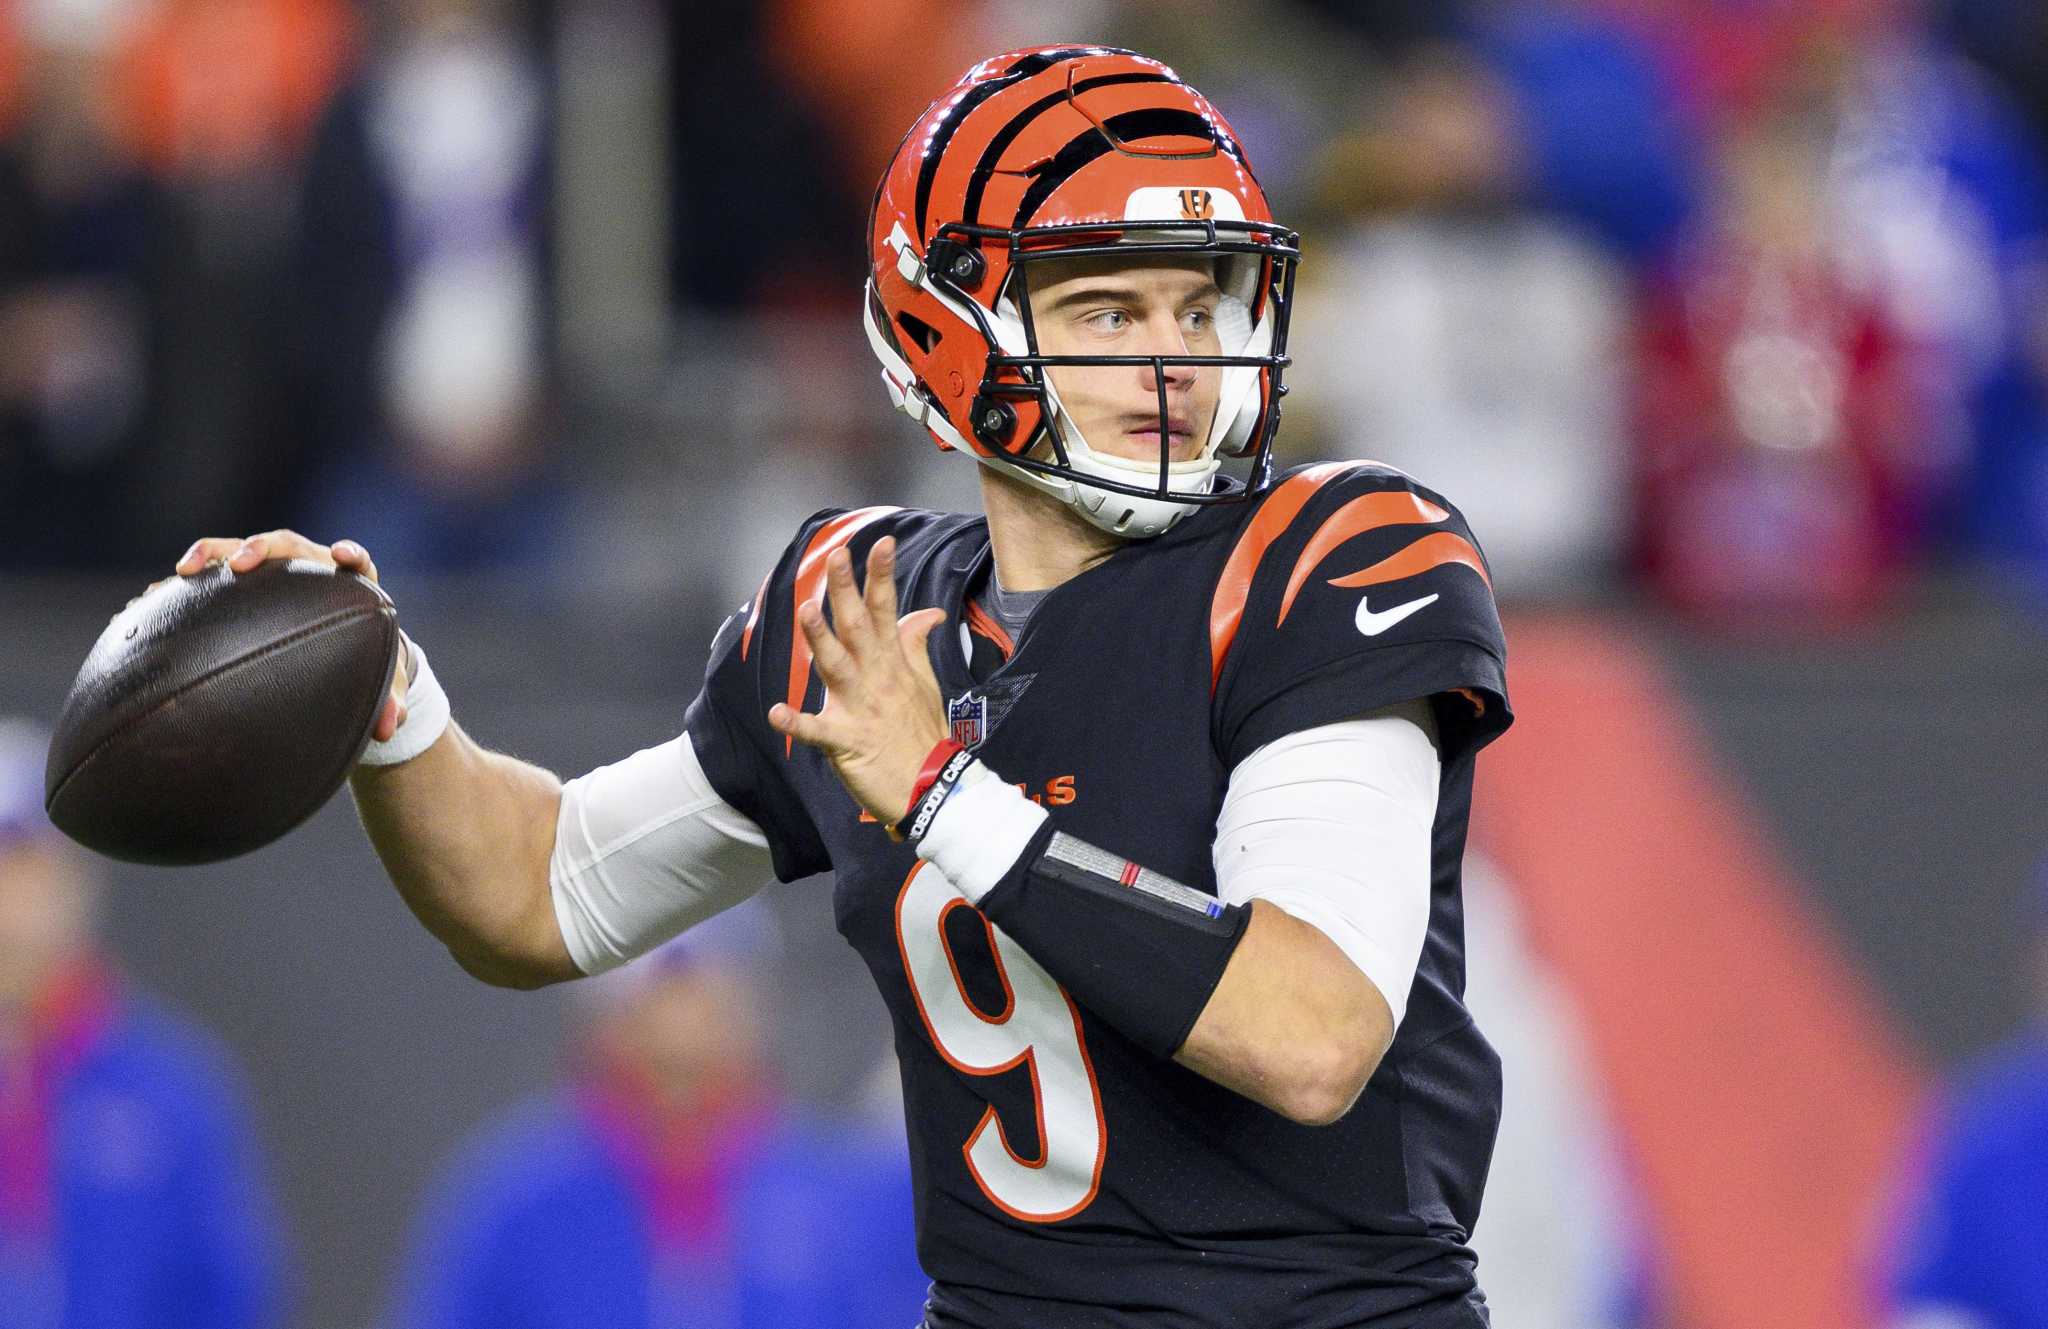 Joe Burrow is throwing again as the Bengals' franchise QB rehabs his surgically repaired wrist